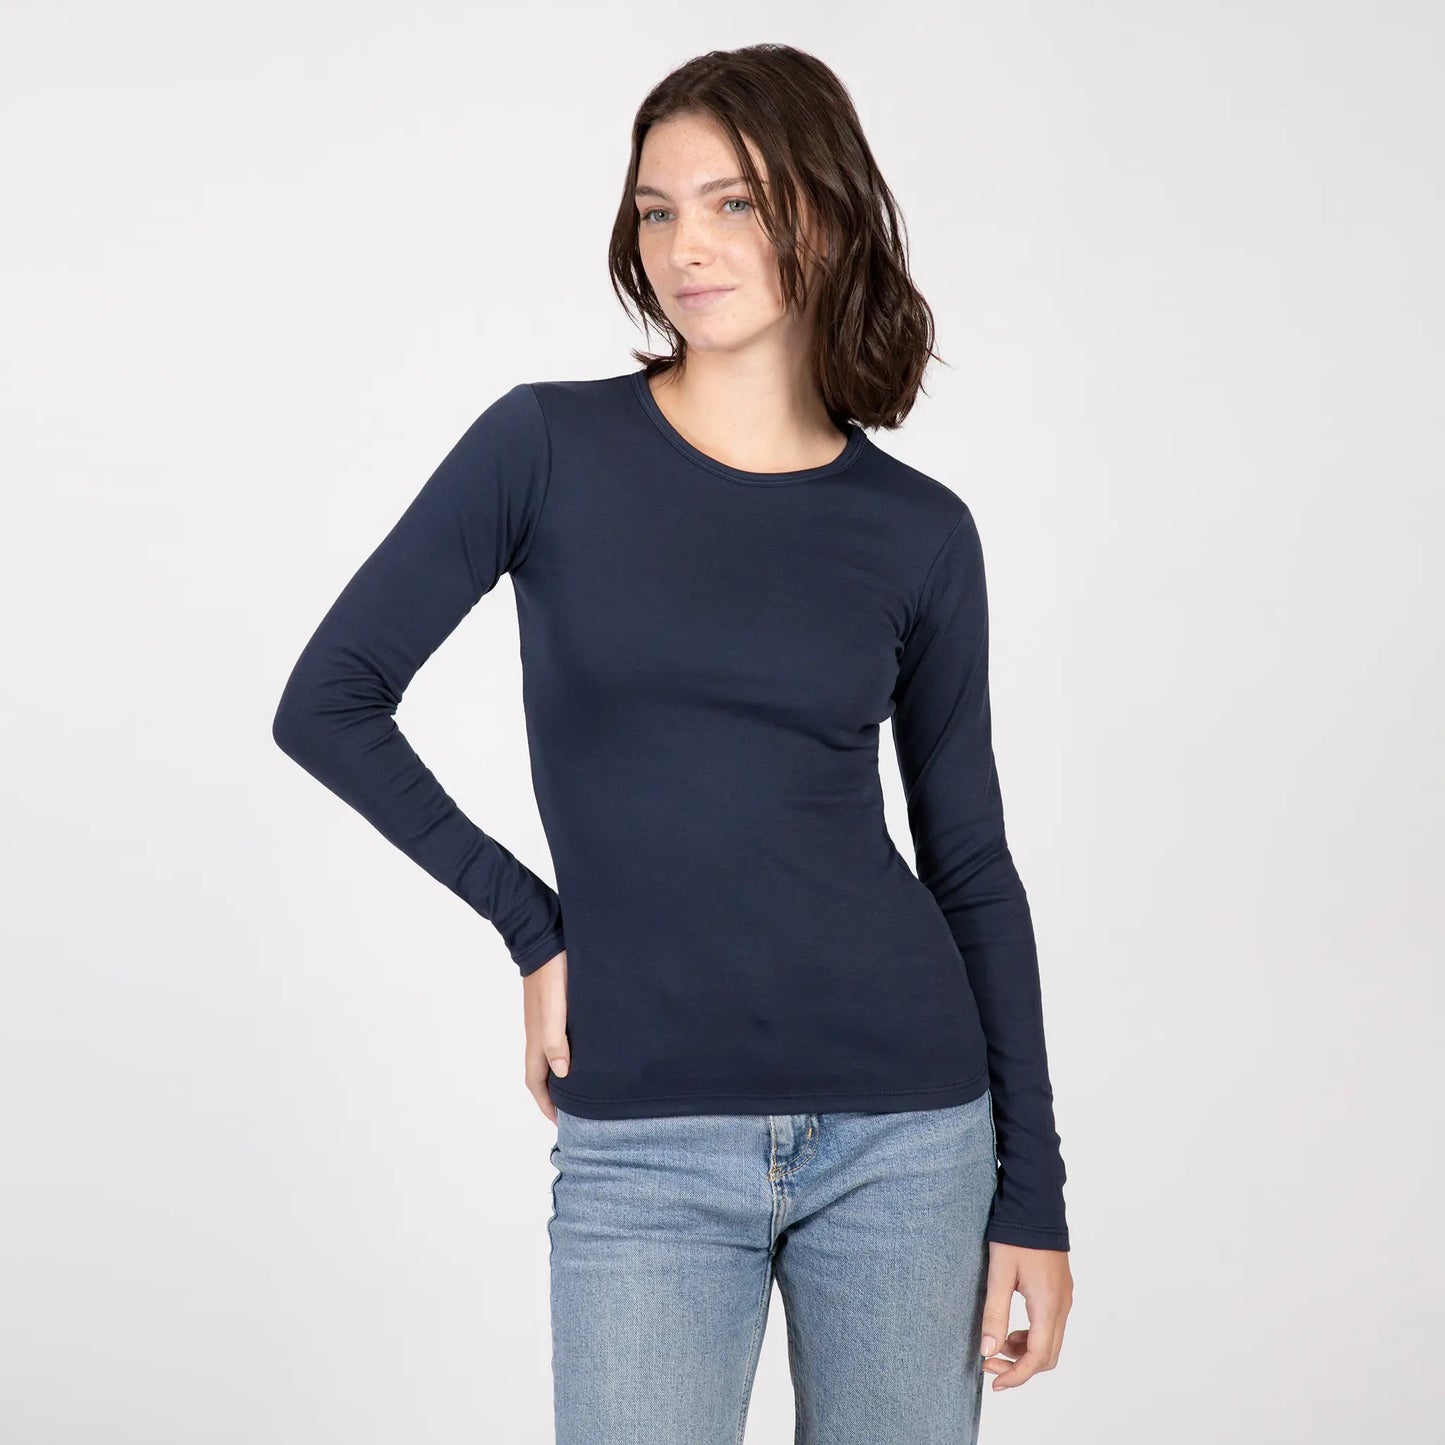 womens sustainable brand tshirt long sleeve color navy blue